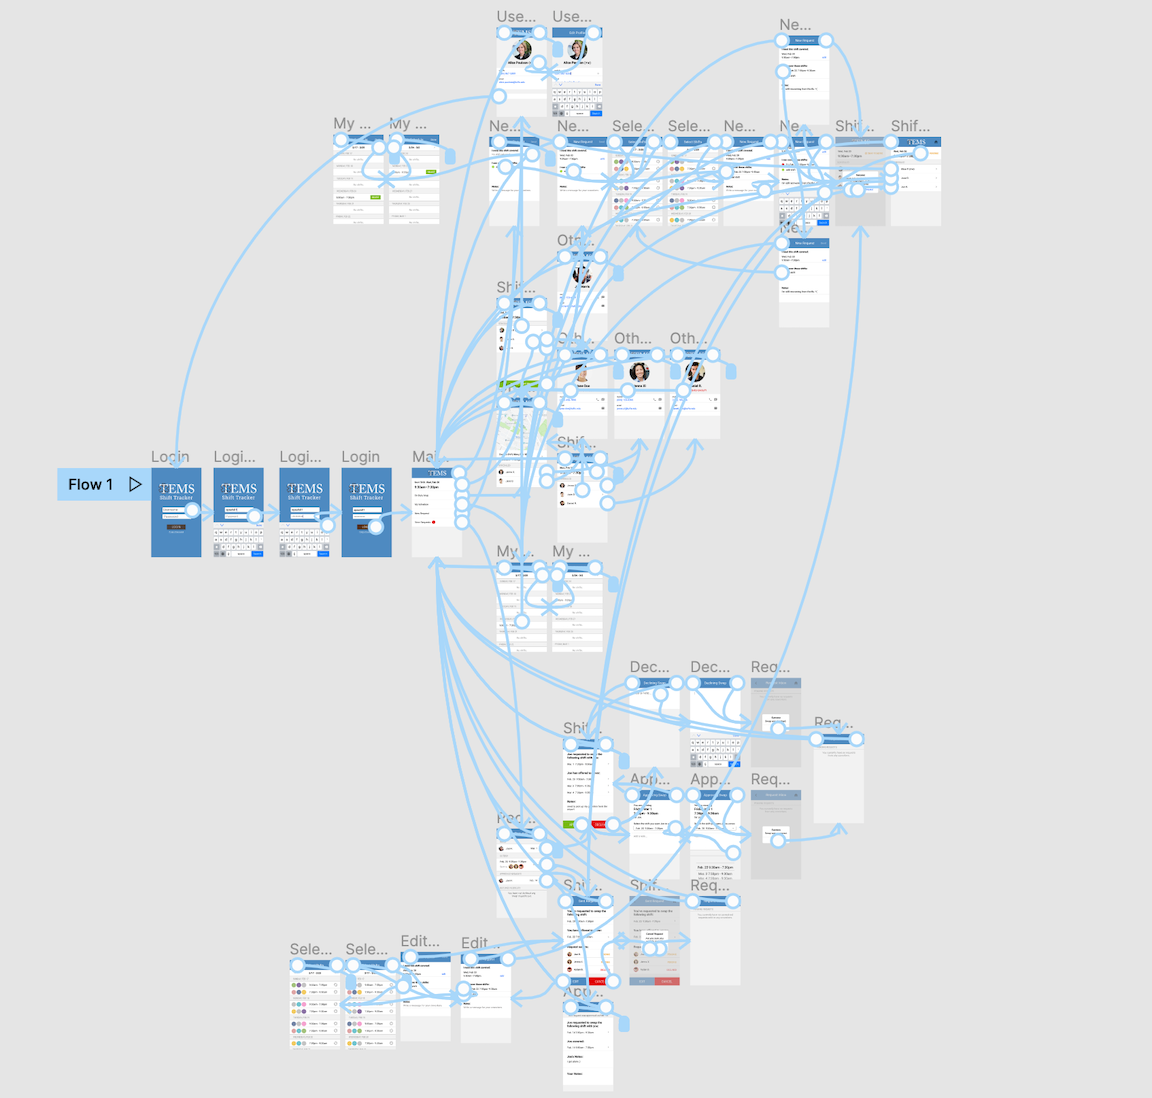 A canvas on Figma showing all the screens of the app, with many blue connecting arrows linking them together